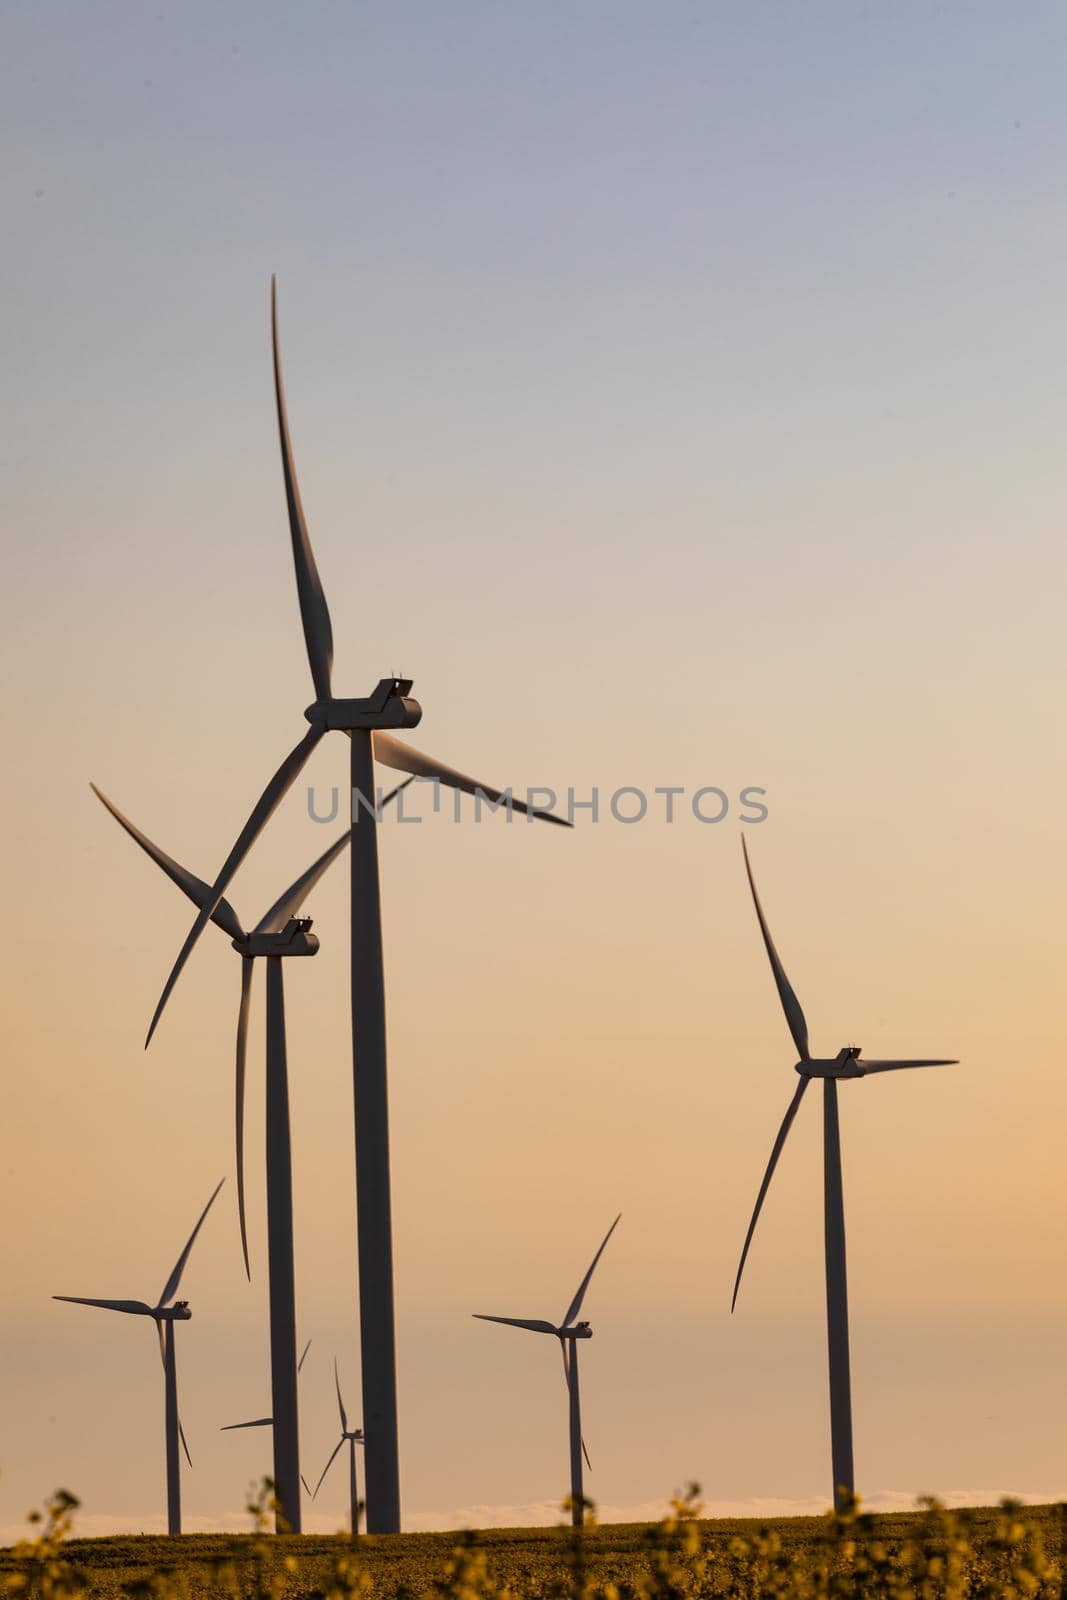 General view of wind turbines in countryside landscape with cloudless sky by Wavebreakmedia